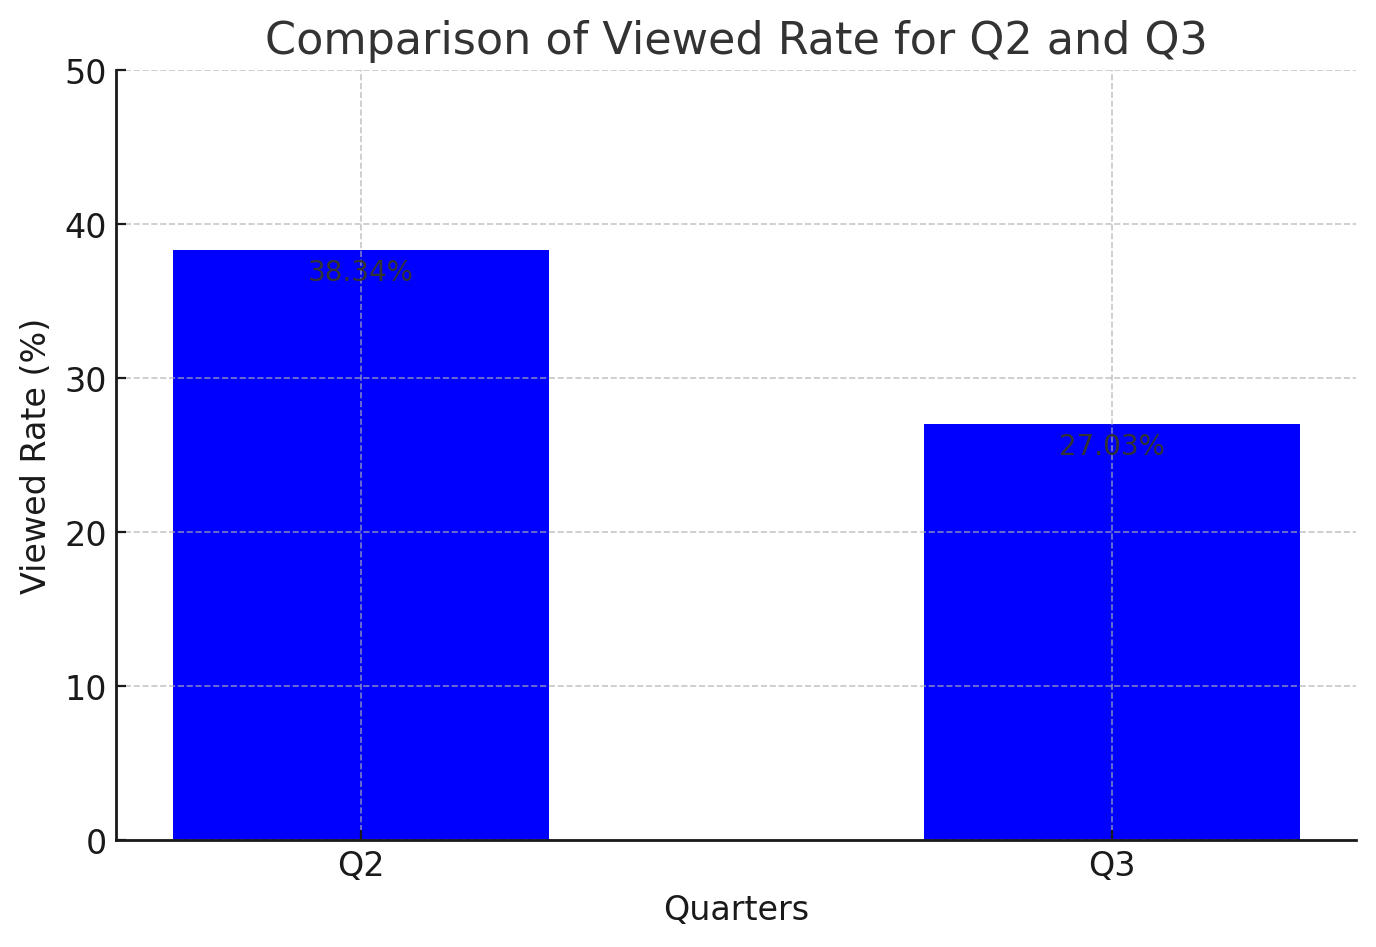 A comparative analysis of viewed rate